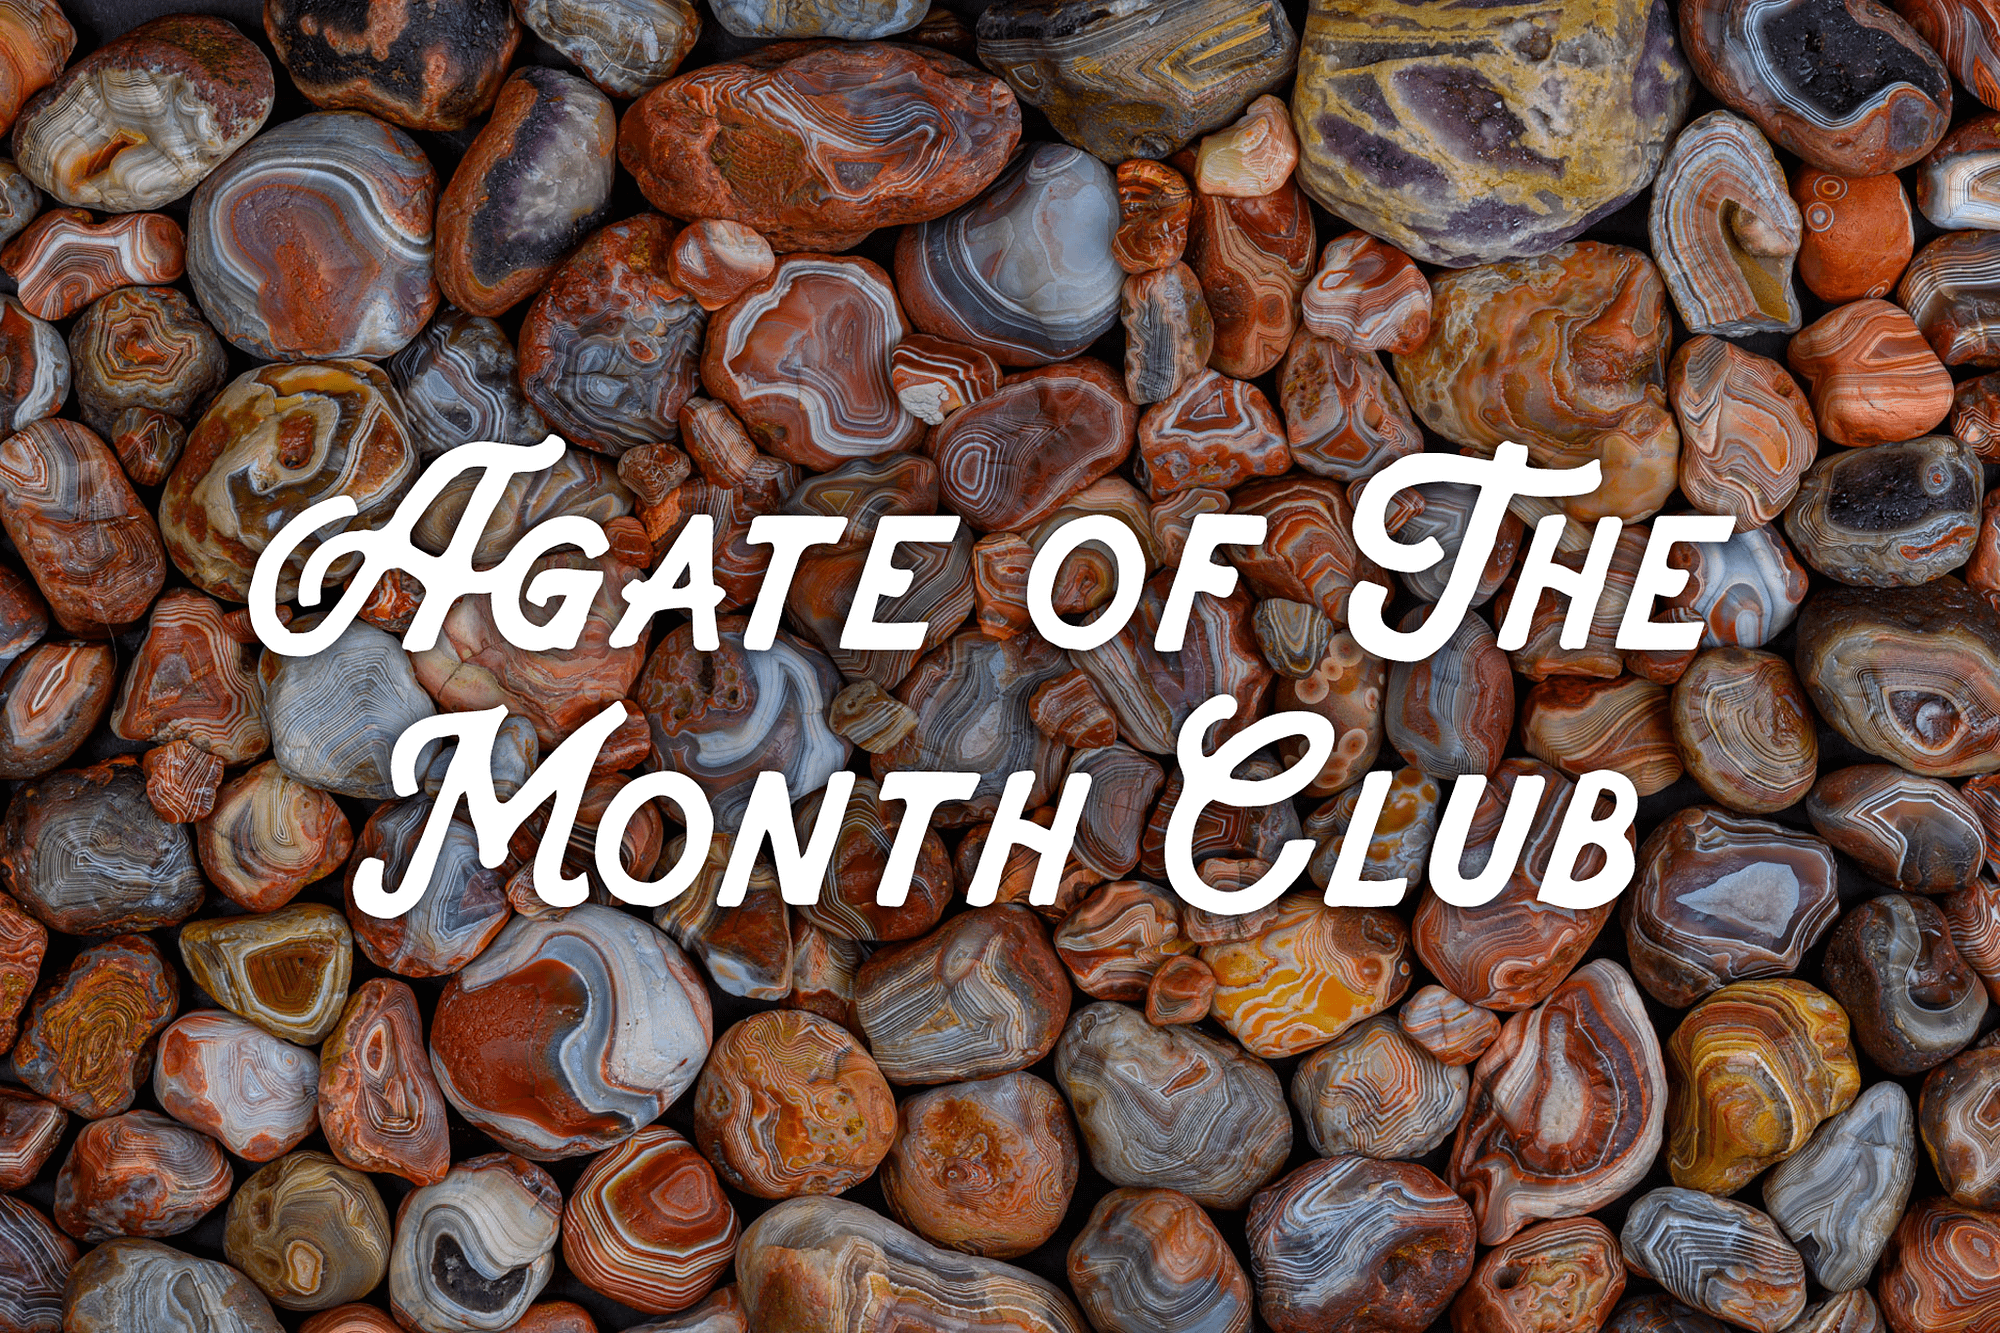 Agate-of-the-Month-Club-The-Agate-Dude